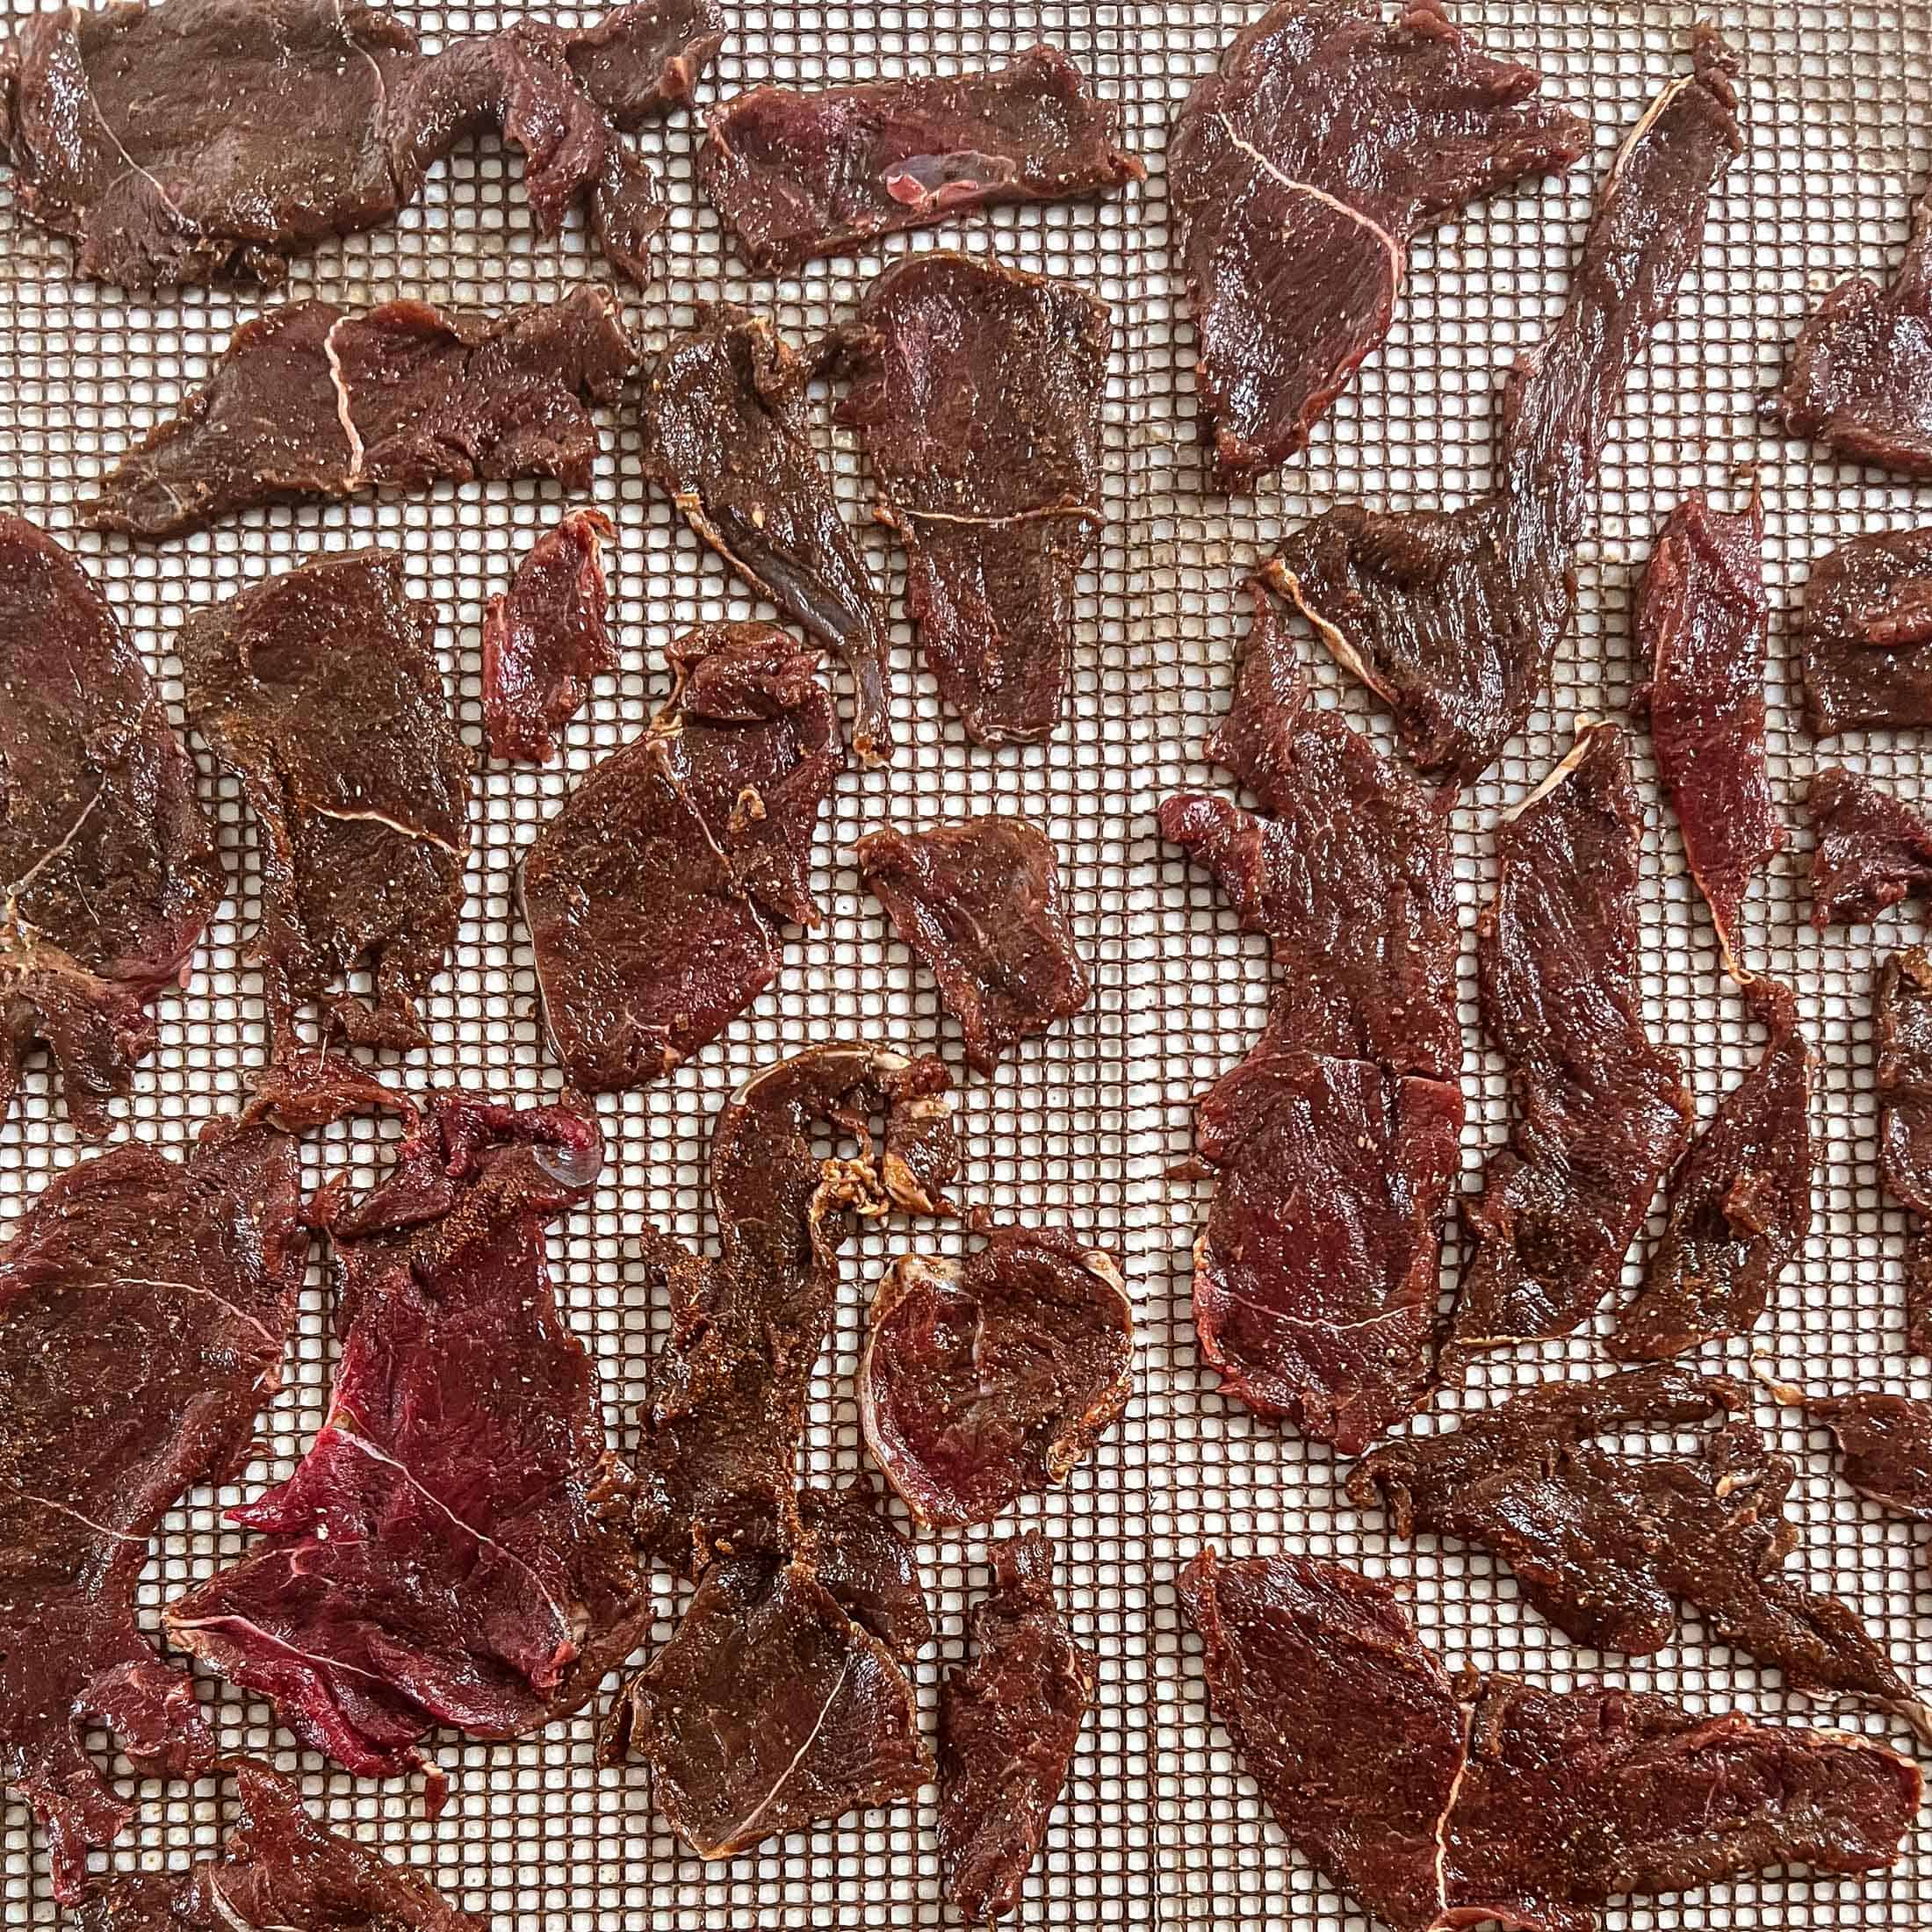 Raw sliced of venison jerky on a grill mat.